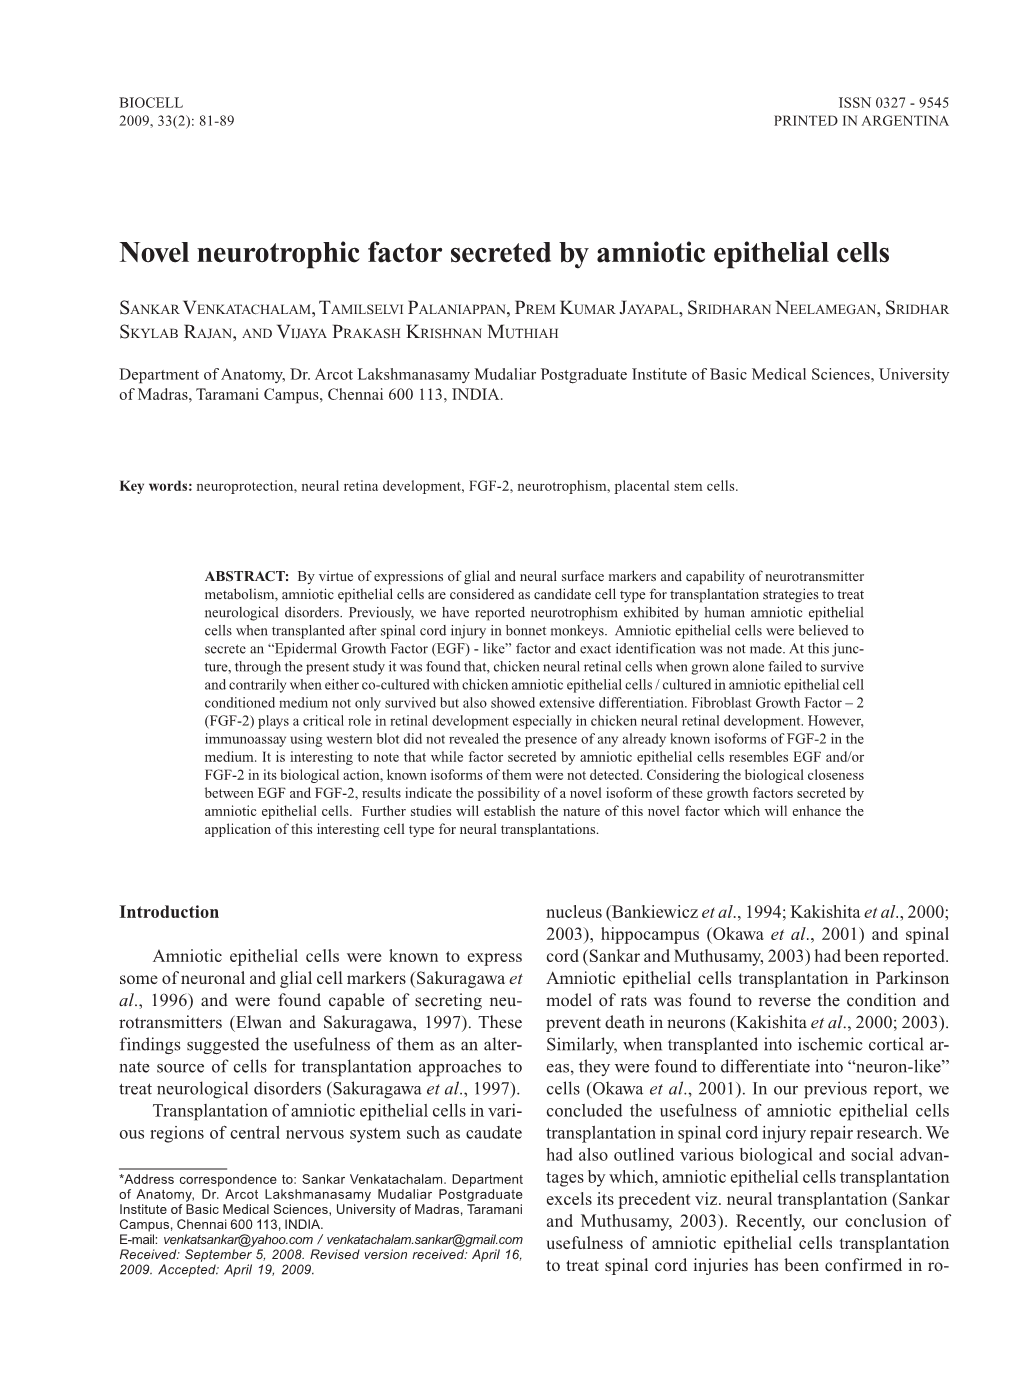 Novel Neurotrophic Factor Secreted by Amniotic Epithelial Cells